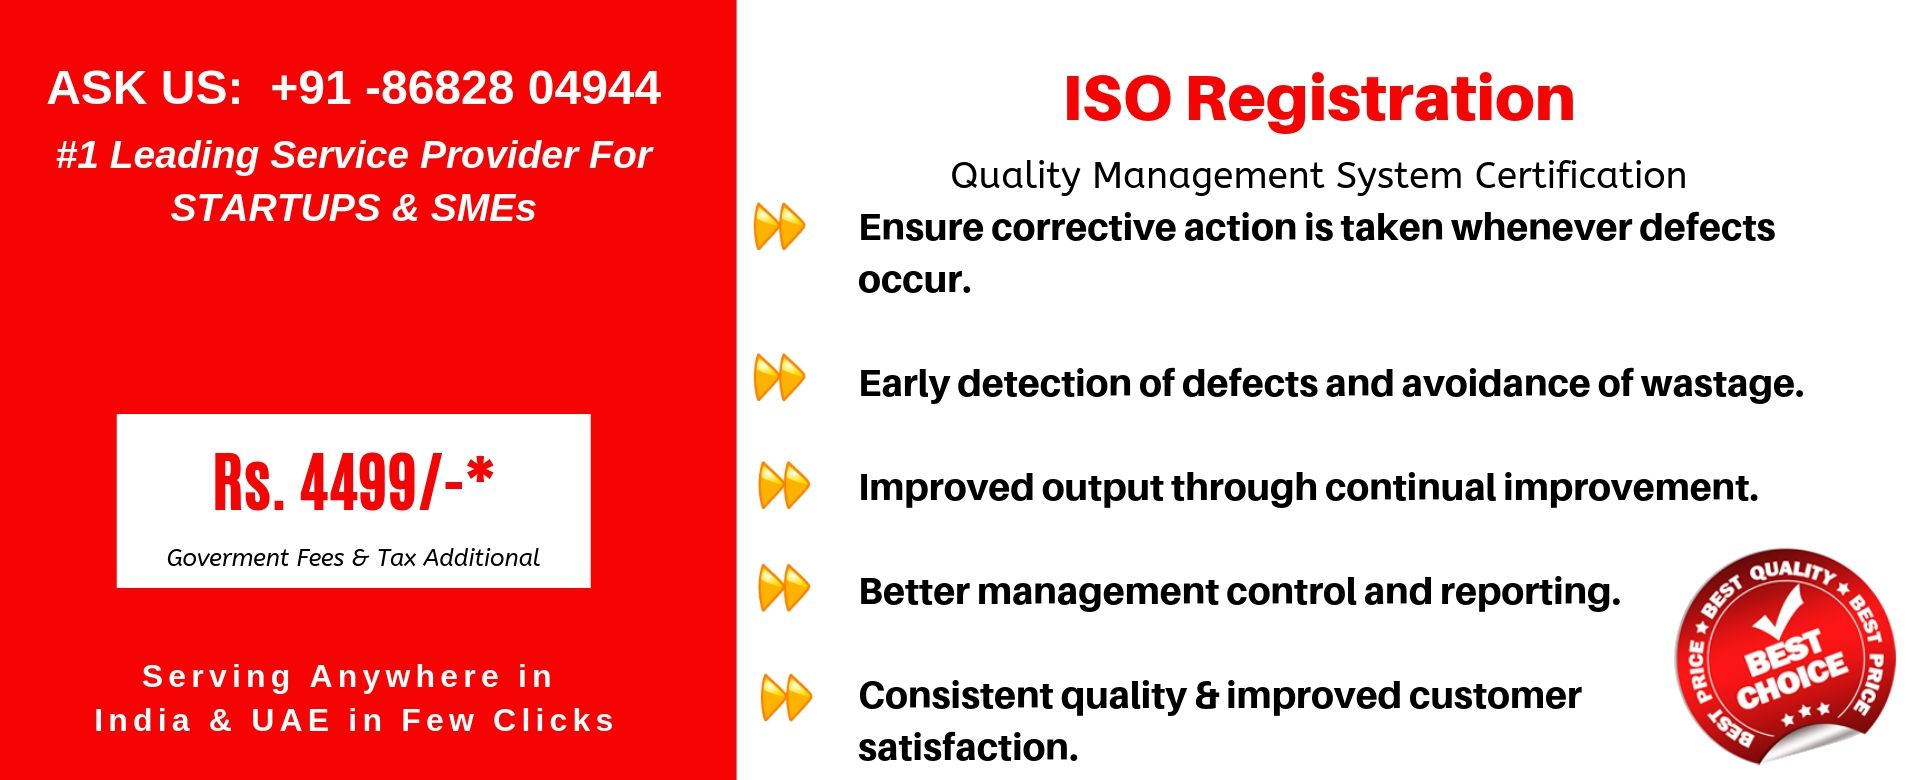 iso registration in india